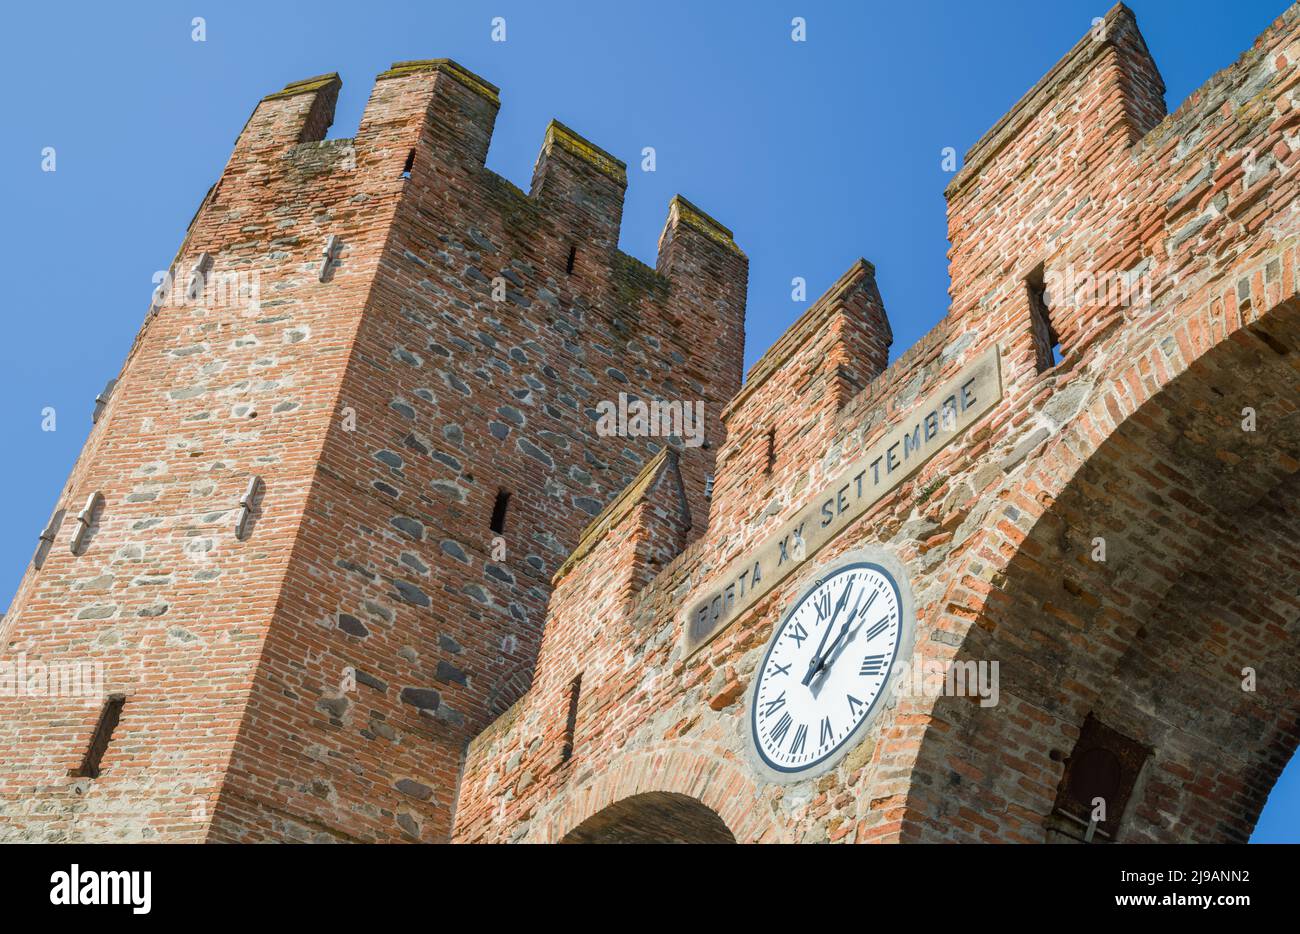 Italy, Montagnana, the XX Settembre gate part of the medieval walls that surround the town Stock Photo